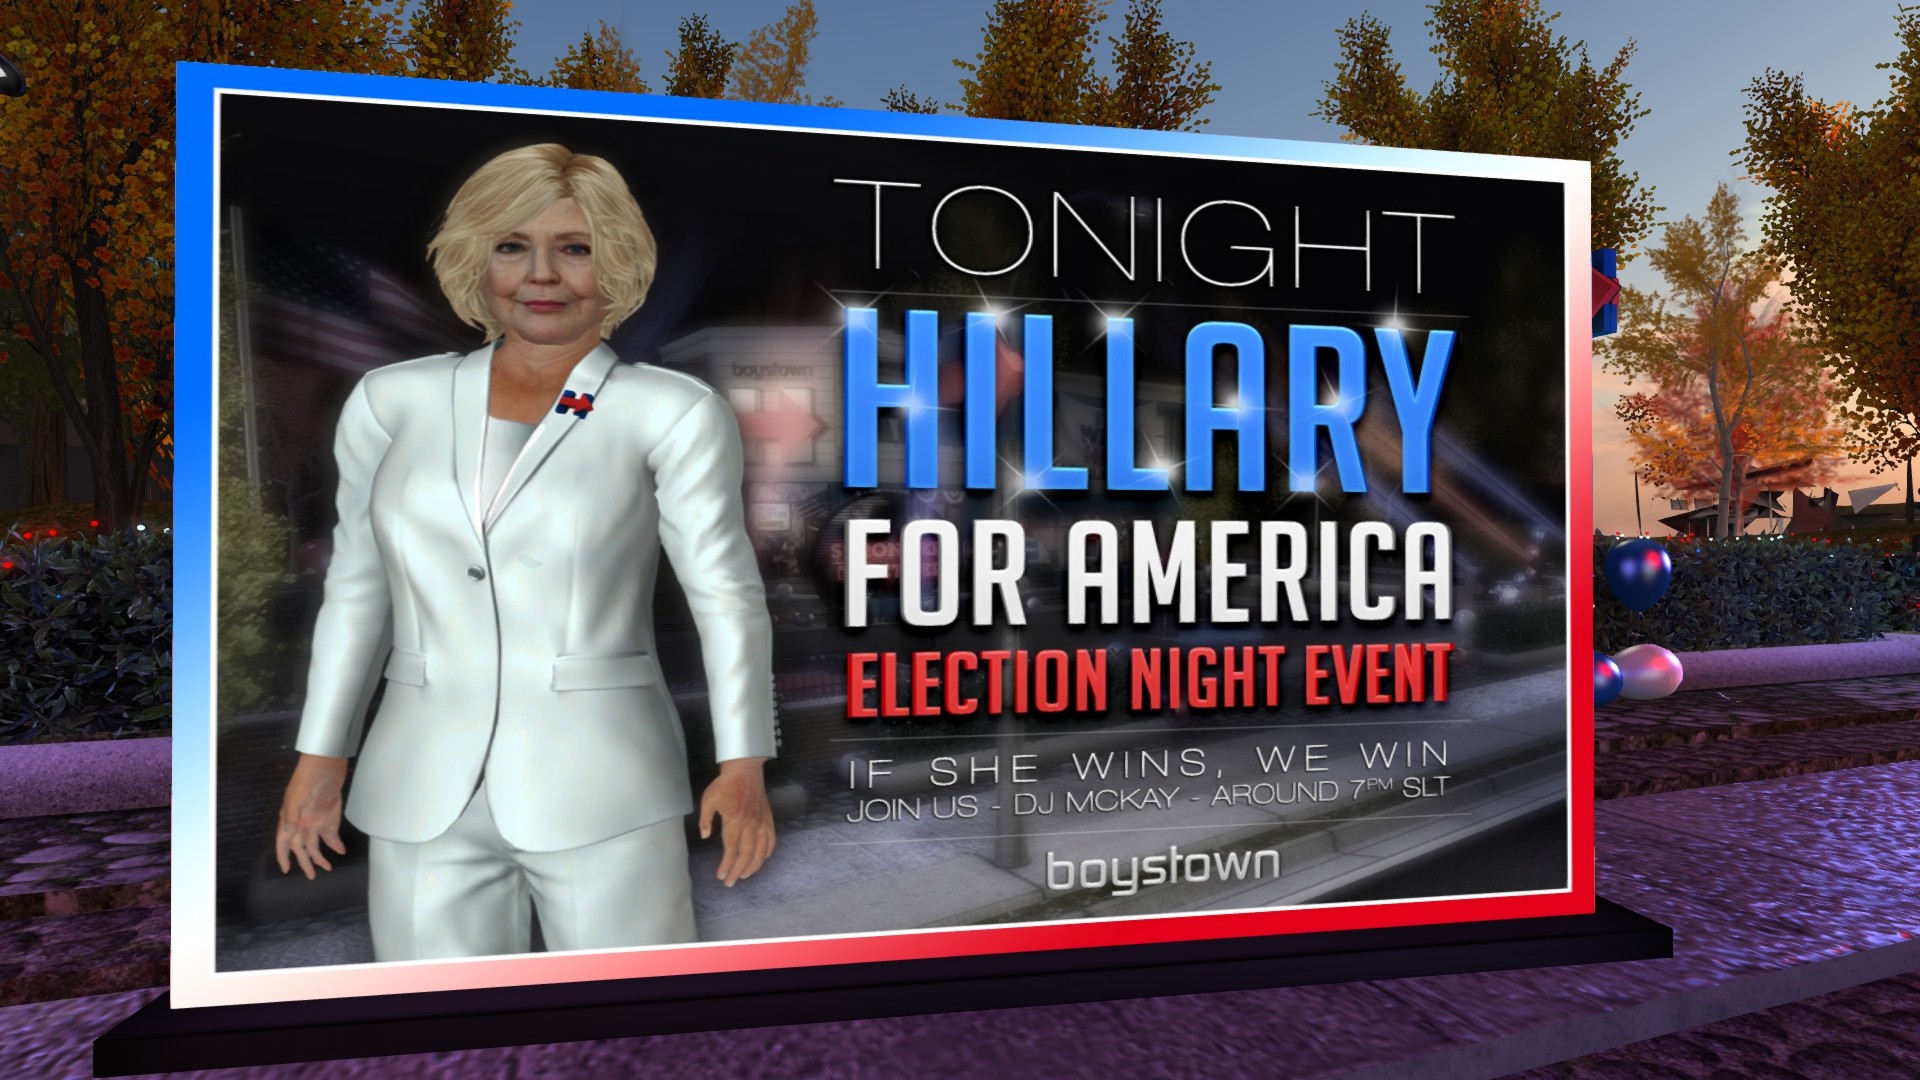 1920x1080 The party is being held by the Hillary Clinton 2016 Second Life group (not  to be confused with the still-existing Hillary Clinton 2008 Second Life  group).